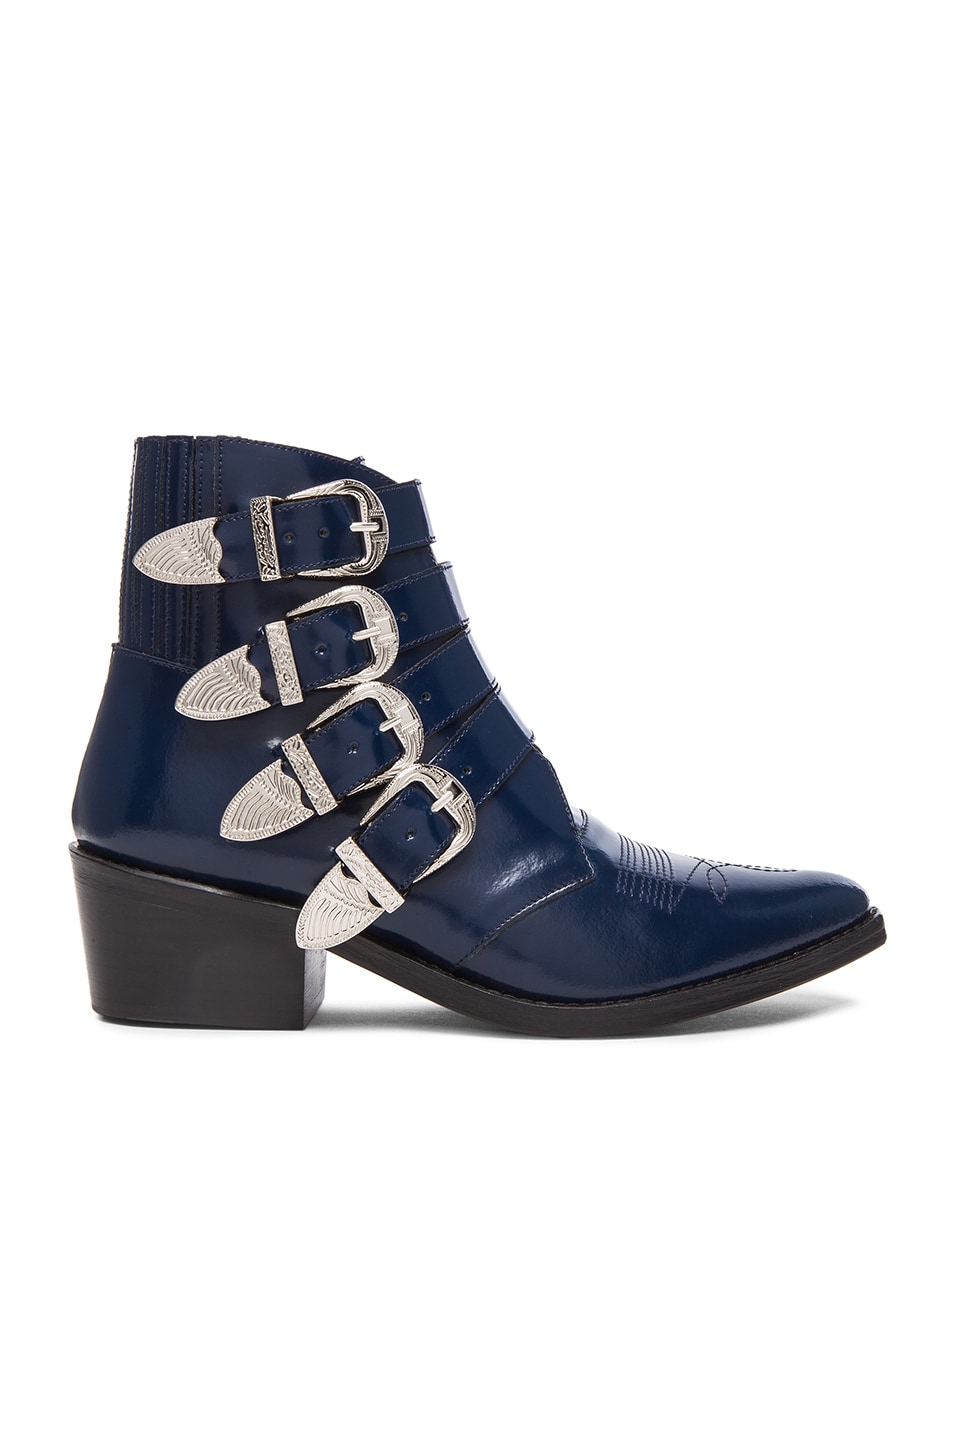 Image 1 of TOGA PULLA Leather Buckle Booties in Navy